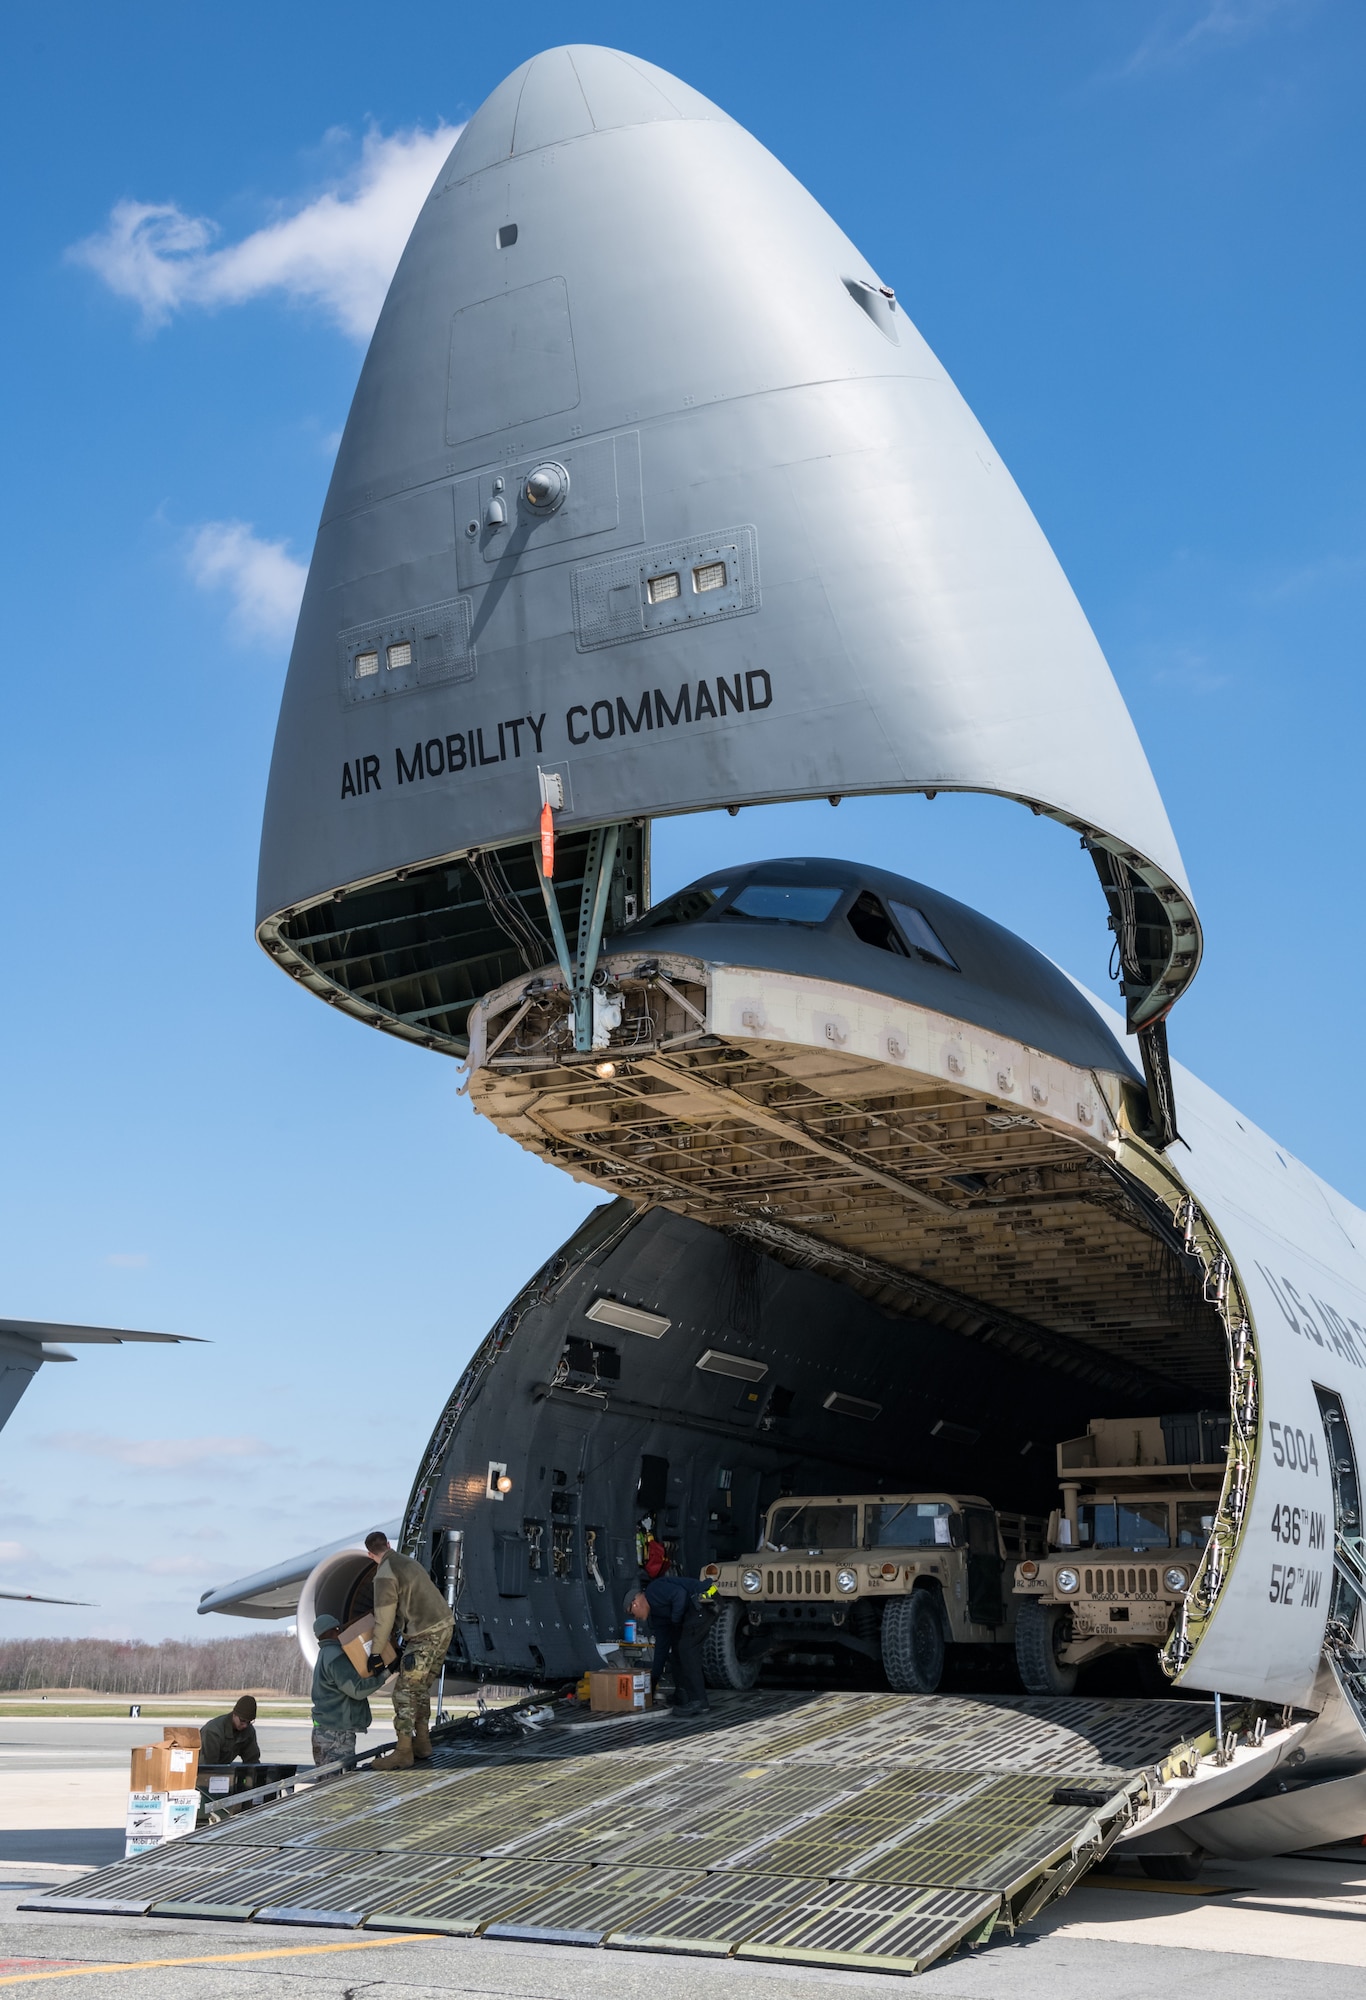 A team of 436th Aerial Port Squadron personnel prepare to unload Humvees down the forward loading ramp of a C-5M Super Galaxy March 26, 2020, at Dover Air Force Base, Delaware. Numerous Humvees were off-loaded from the Super Galaxy as required airlift operations continued during the evolving COVID-19 pandemic. (U.S. Air Force photo by Roland Balik)